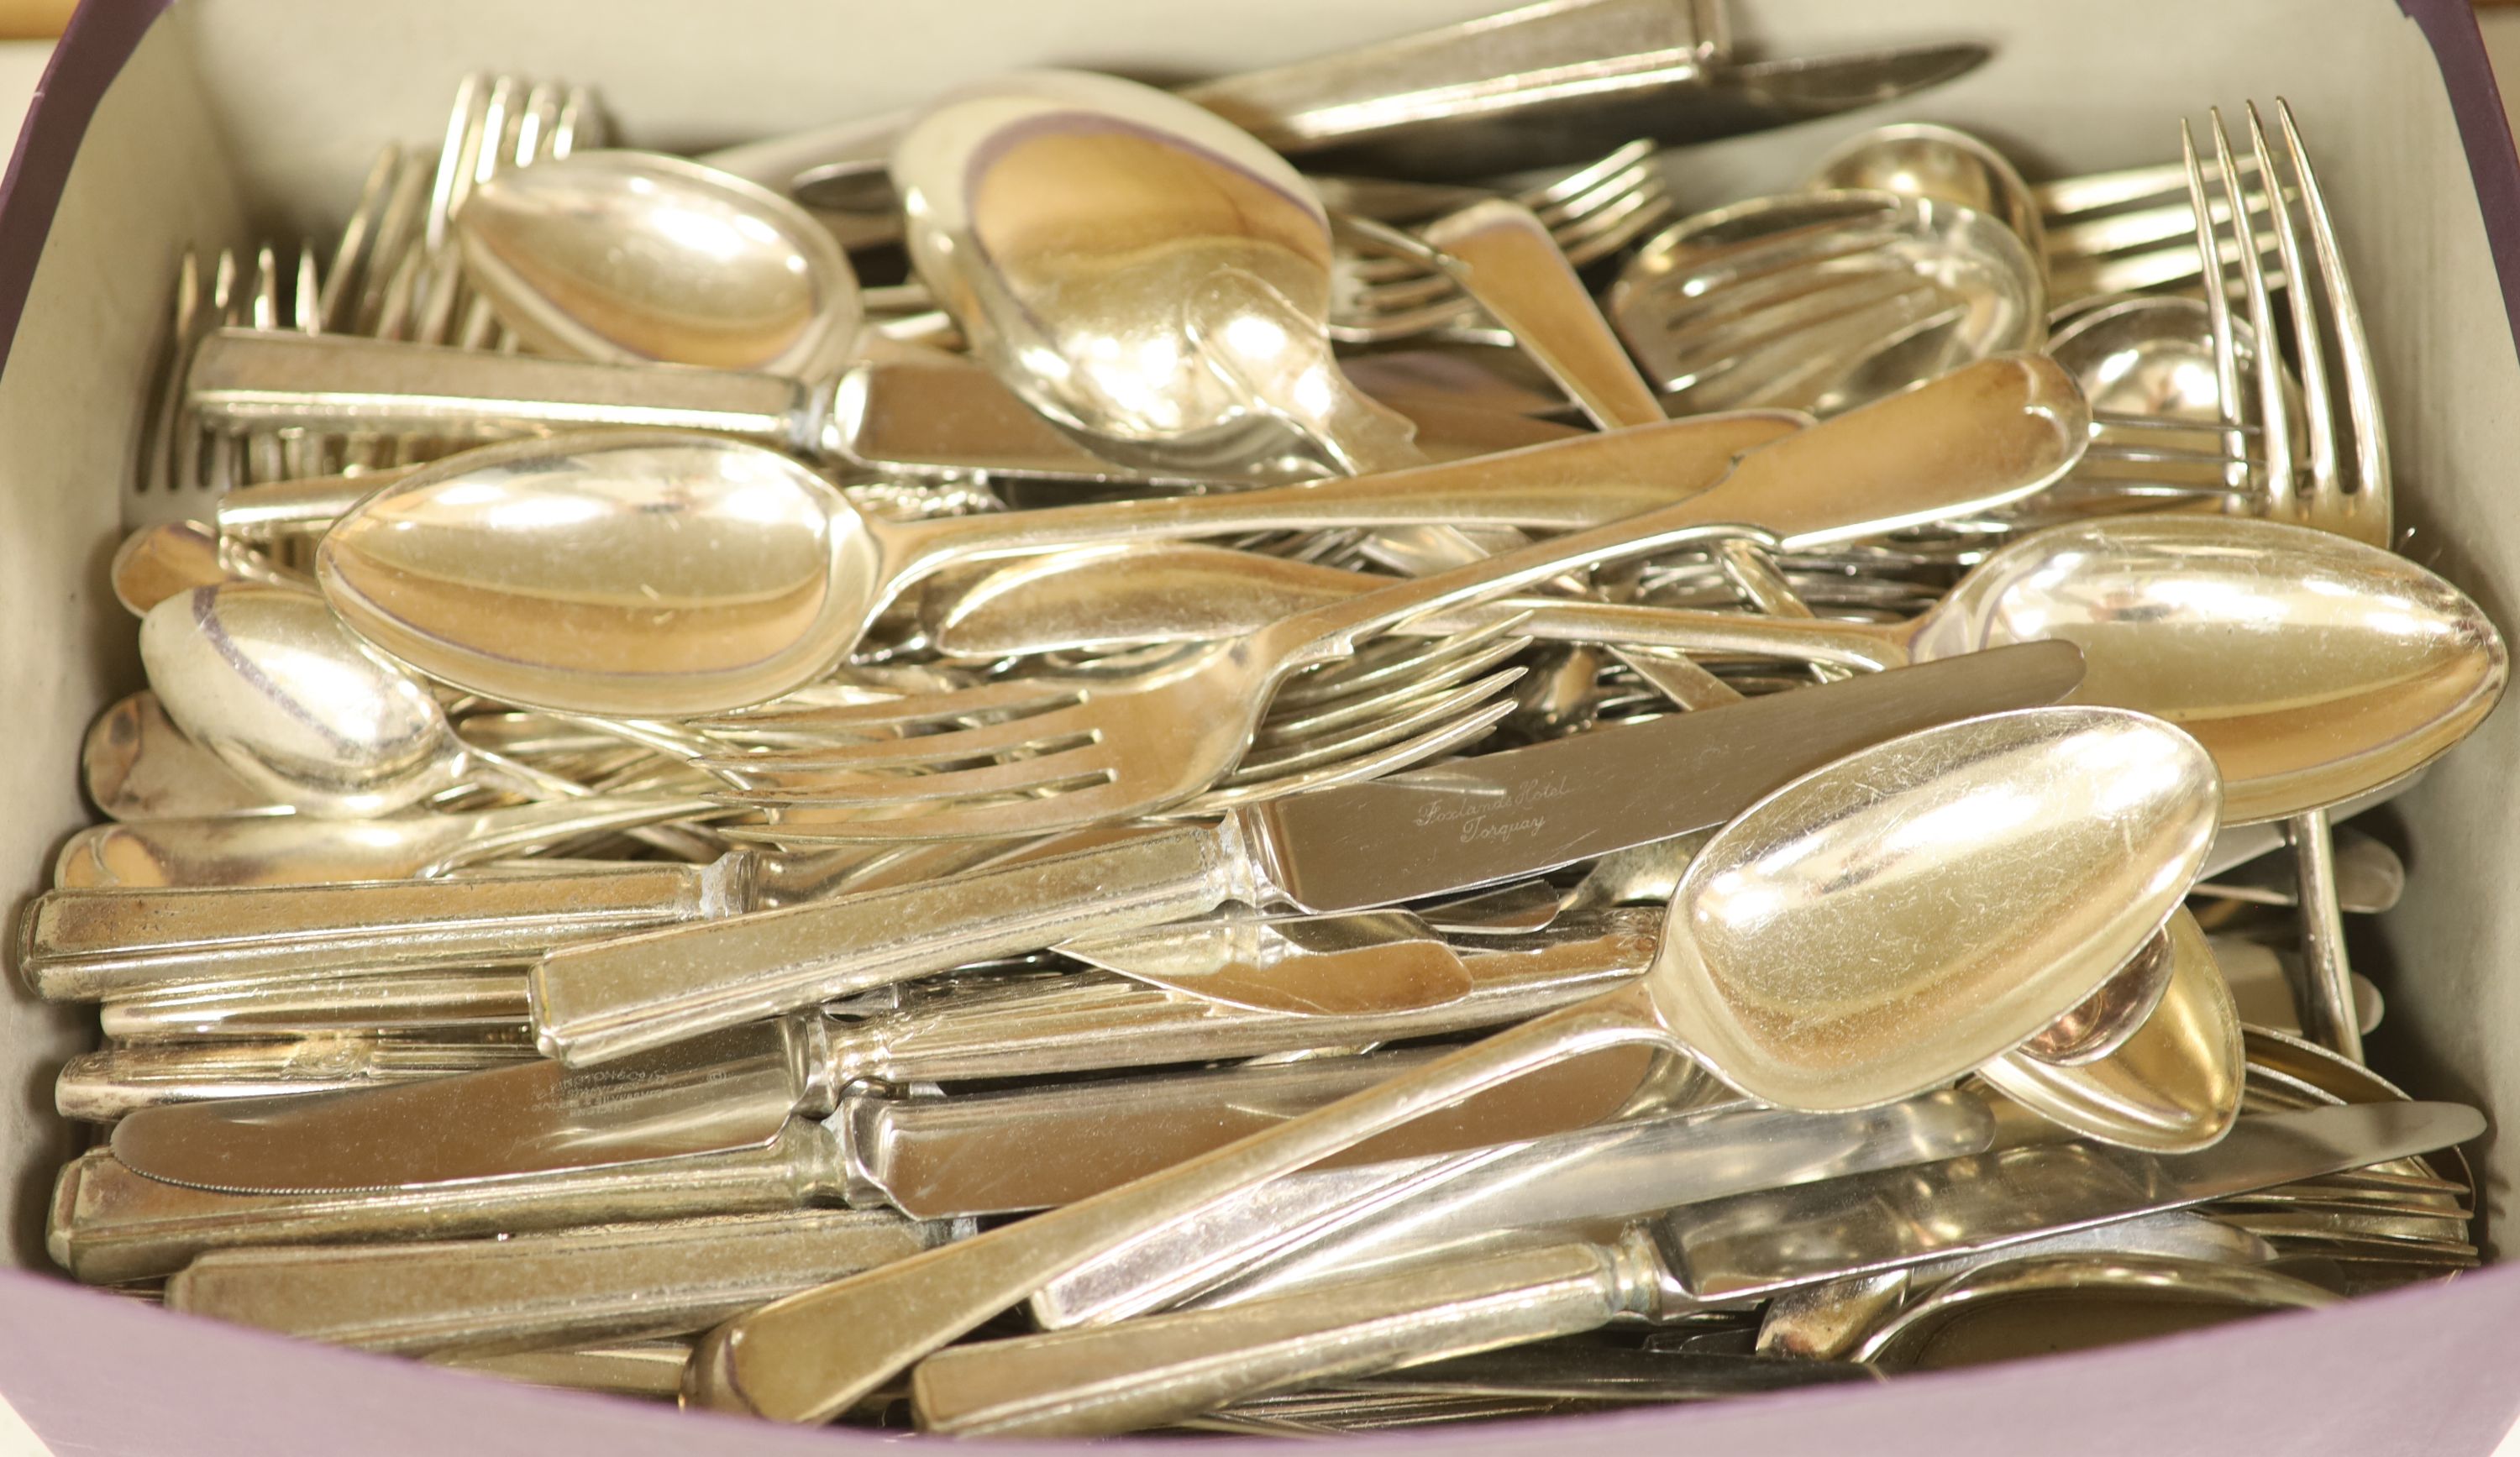 A quantity of silver-plated cutlery